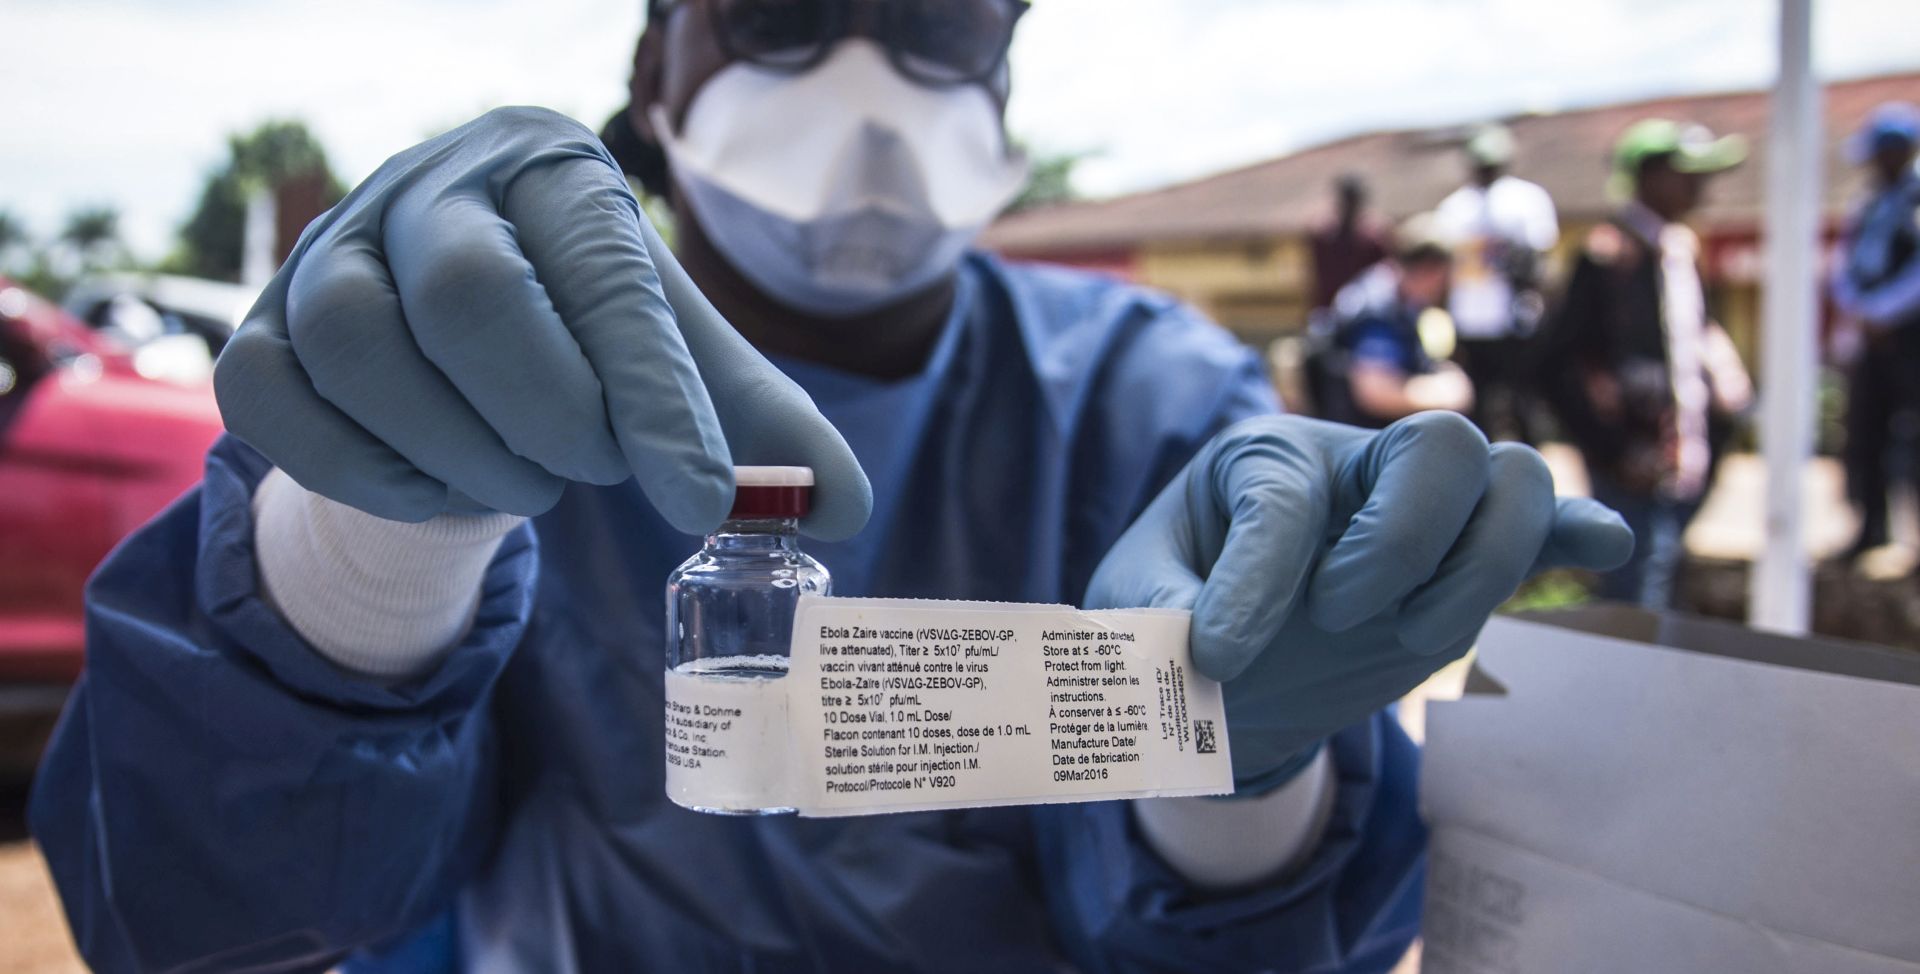 epa06756608 A worker from the World Health Organization (WHO) holds up a vaccination as he prepares to administer it during the launch of an experimental Ebola vaccine in Mbandaka, north-western Democratic Republic of the Congo, 21 May 2018 (issued 22 May 2018). Two more people have died of Ebola, the Congolese authority said on 22 May. One of the deaths occured in Mbandaka, while another died in the village of Bikoro, where the outbreak was first announced in early May. The new outbreak of Ebola has killed 27 people in the  Democratic Republic of the Congo since April.  EPA/STR